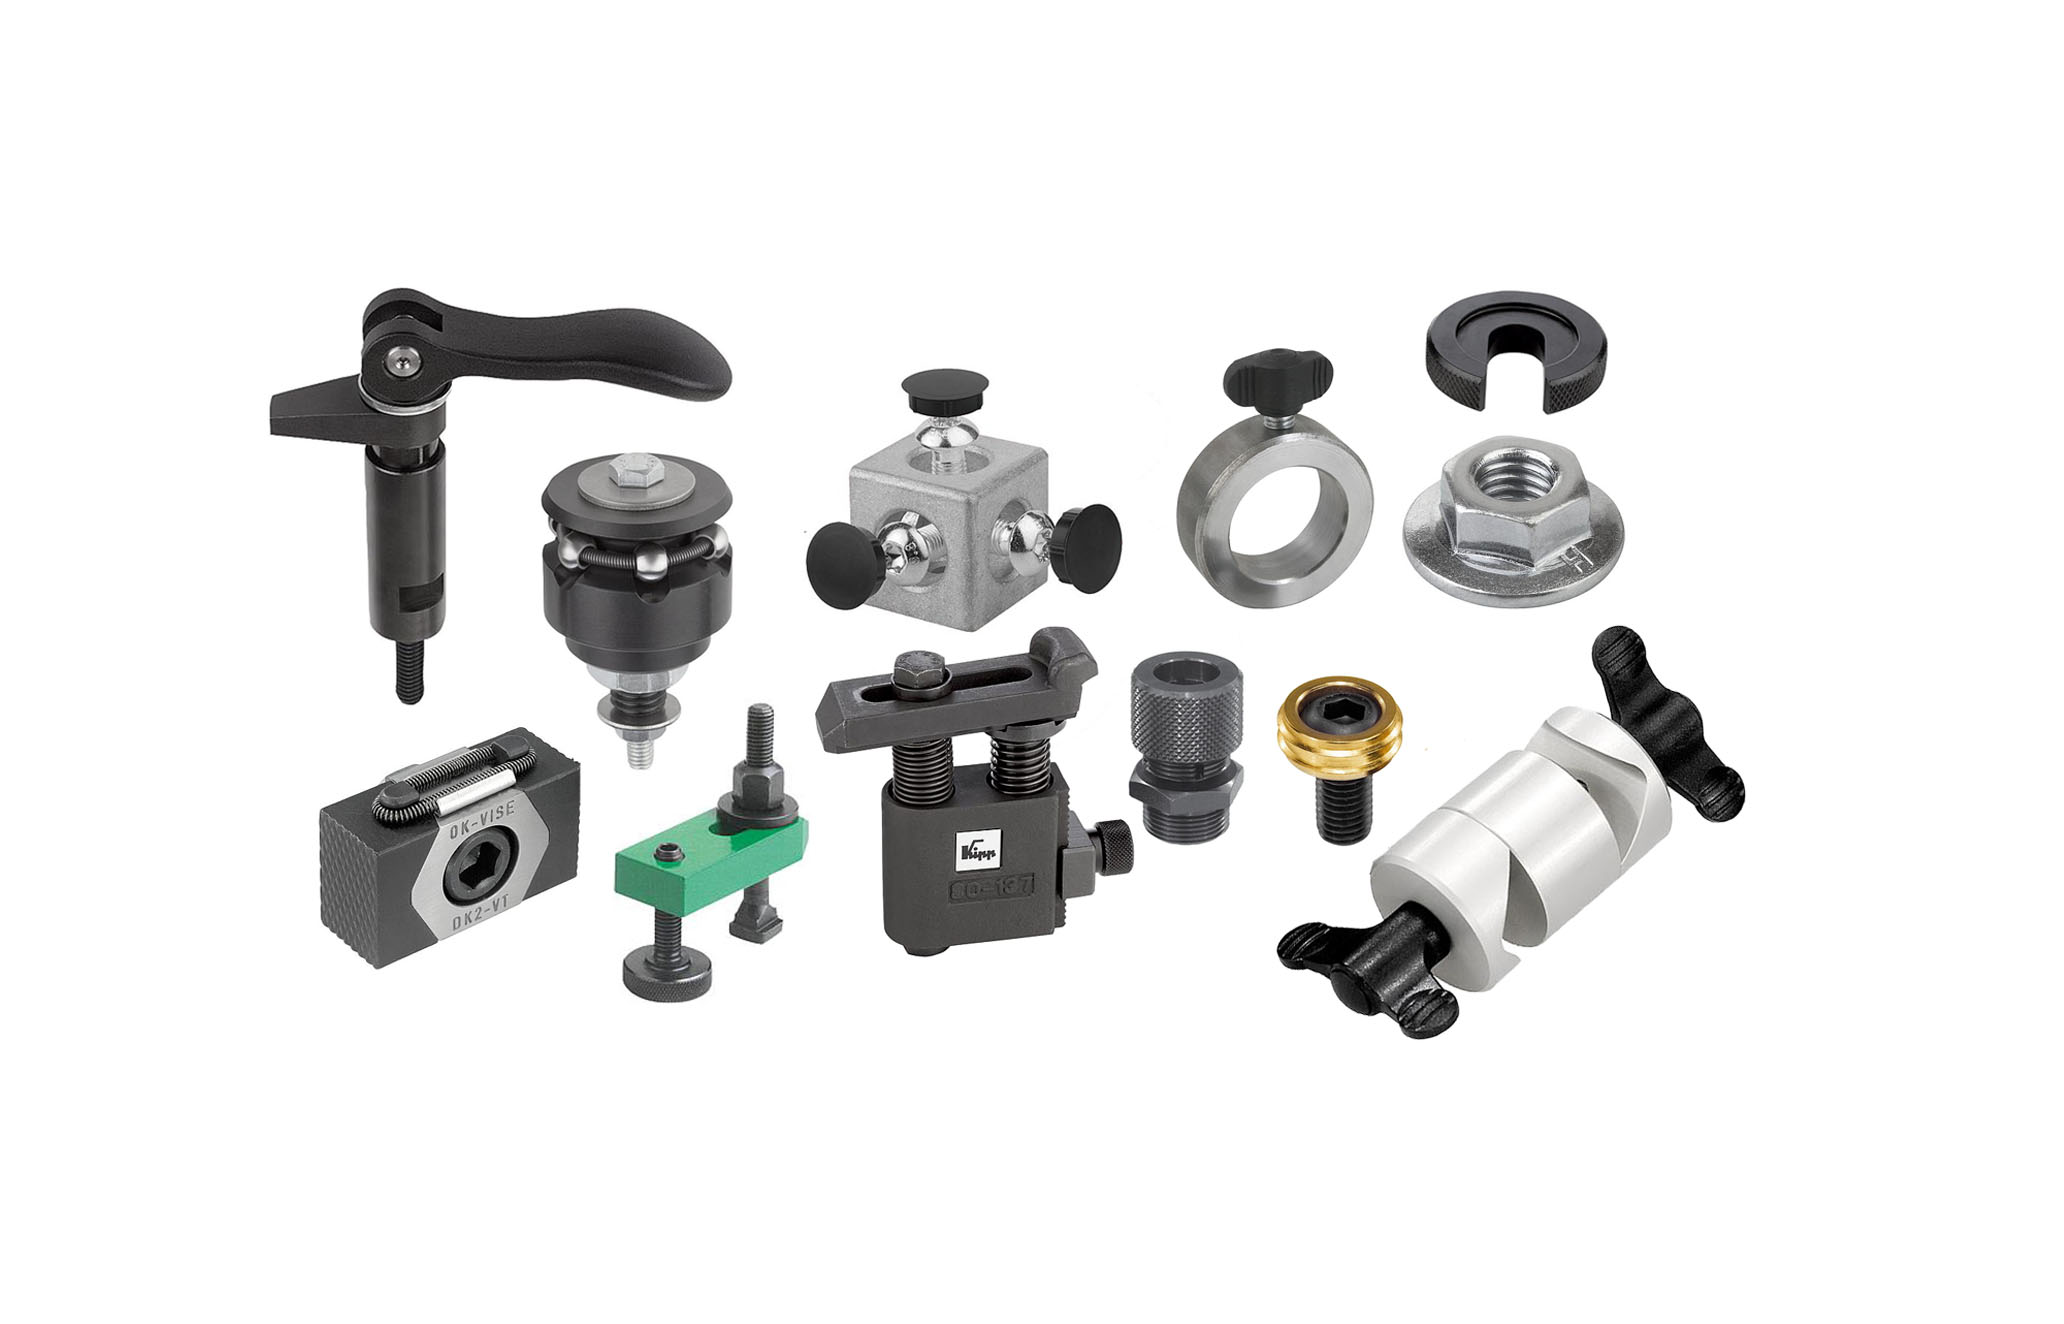 Machine, Fixture Components & Clamping Devices